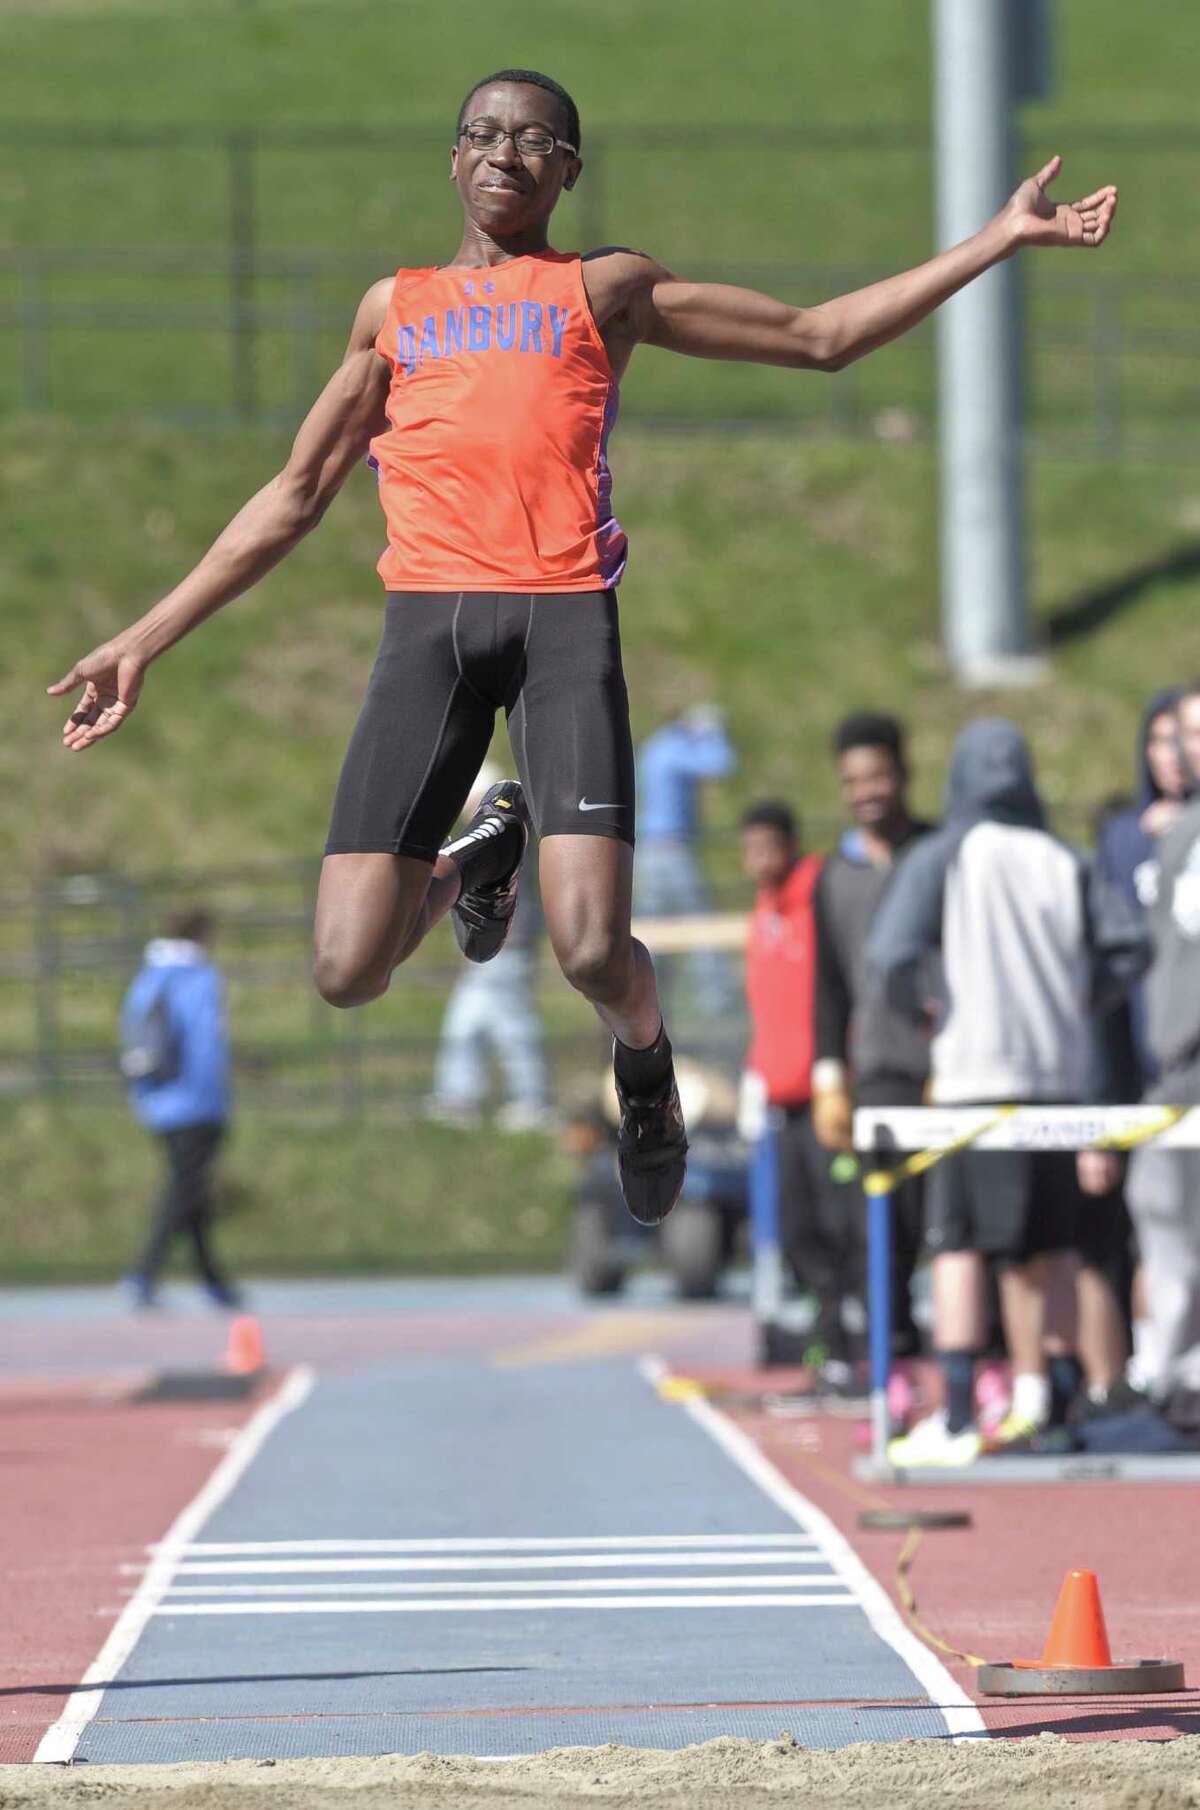 FILE PHOTO: Tumani Edwards, from Danbury High School, competes in the boys long jump during the high school track and field O'Grady Relays, held at Danbury High School, on Saturday, April 25, 2015, in Danbury, Conn.